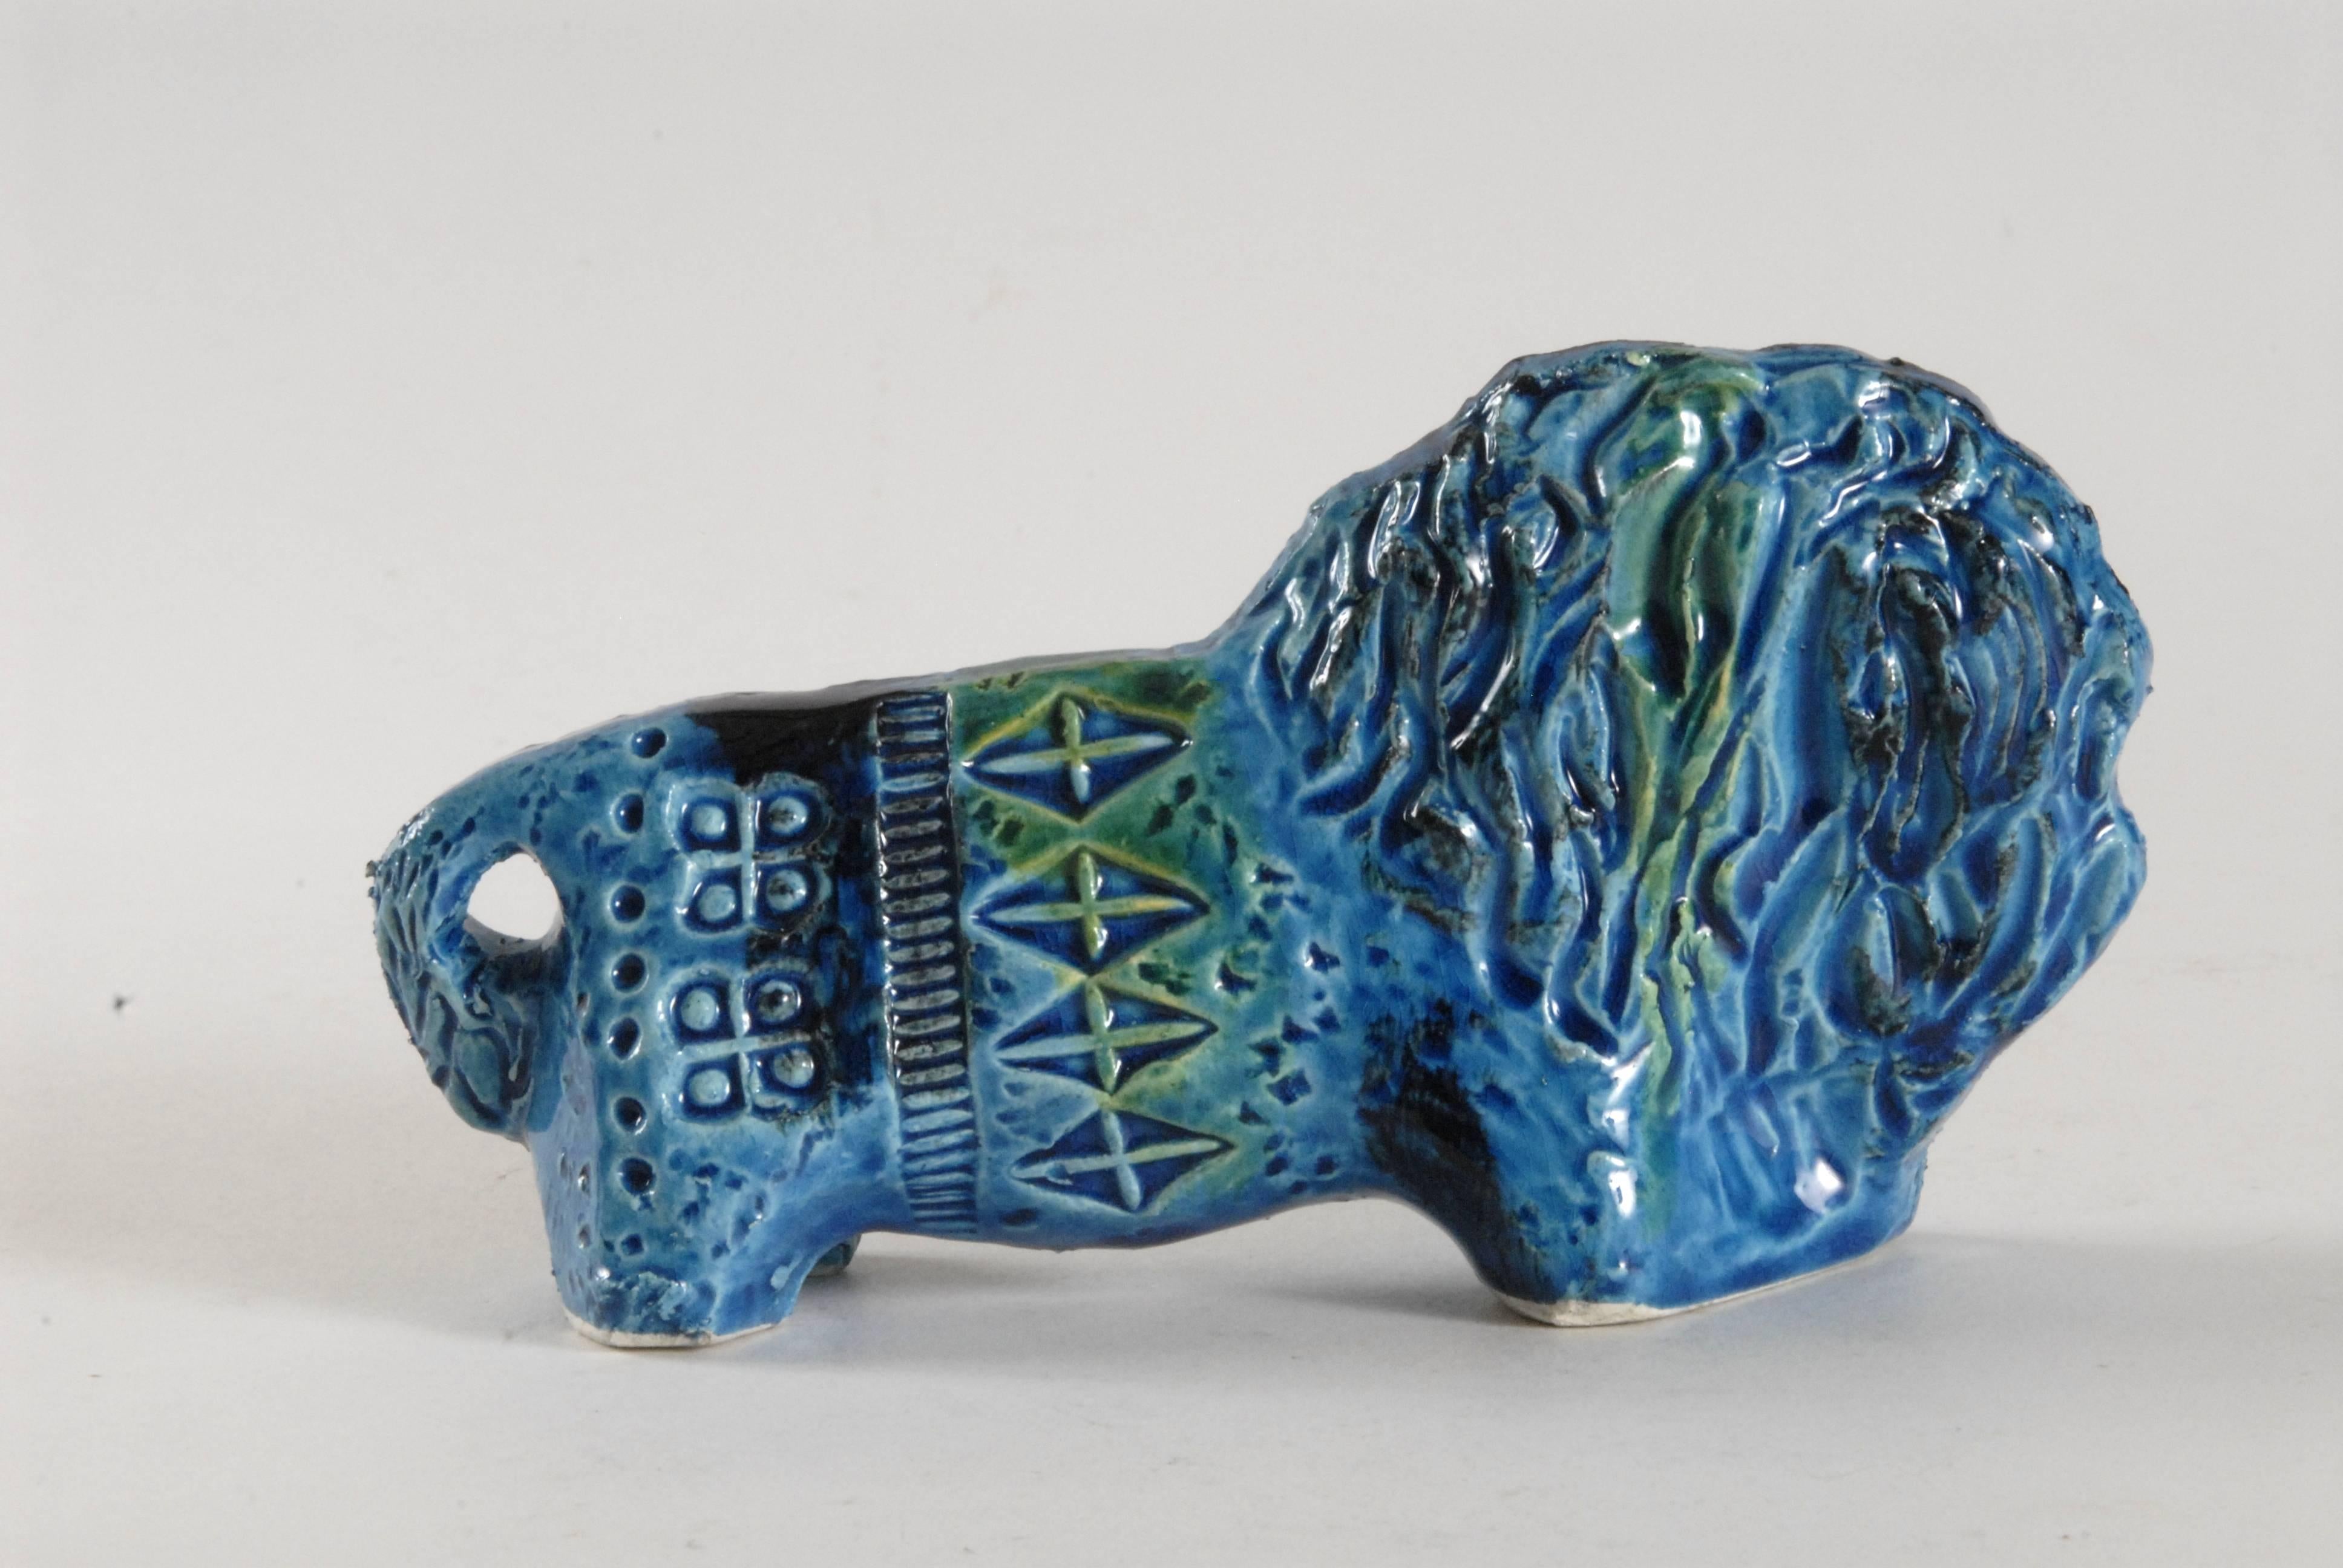 A lovely small side-on facing lion decorated with the 'Rimini Blu' pattern. In lovely condition.